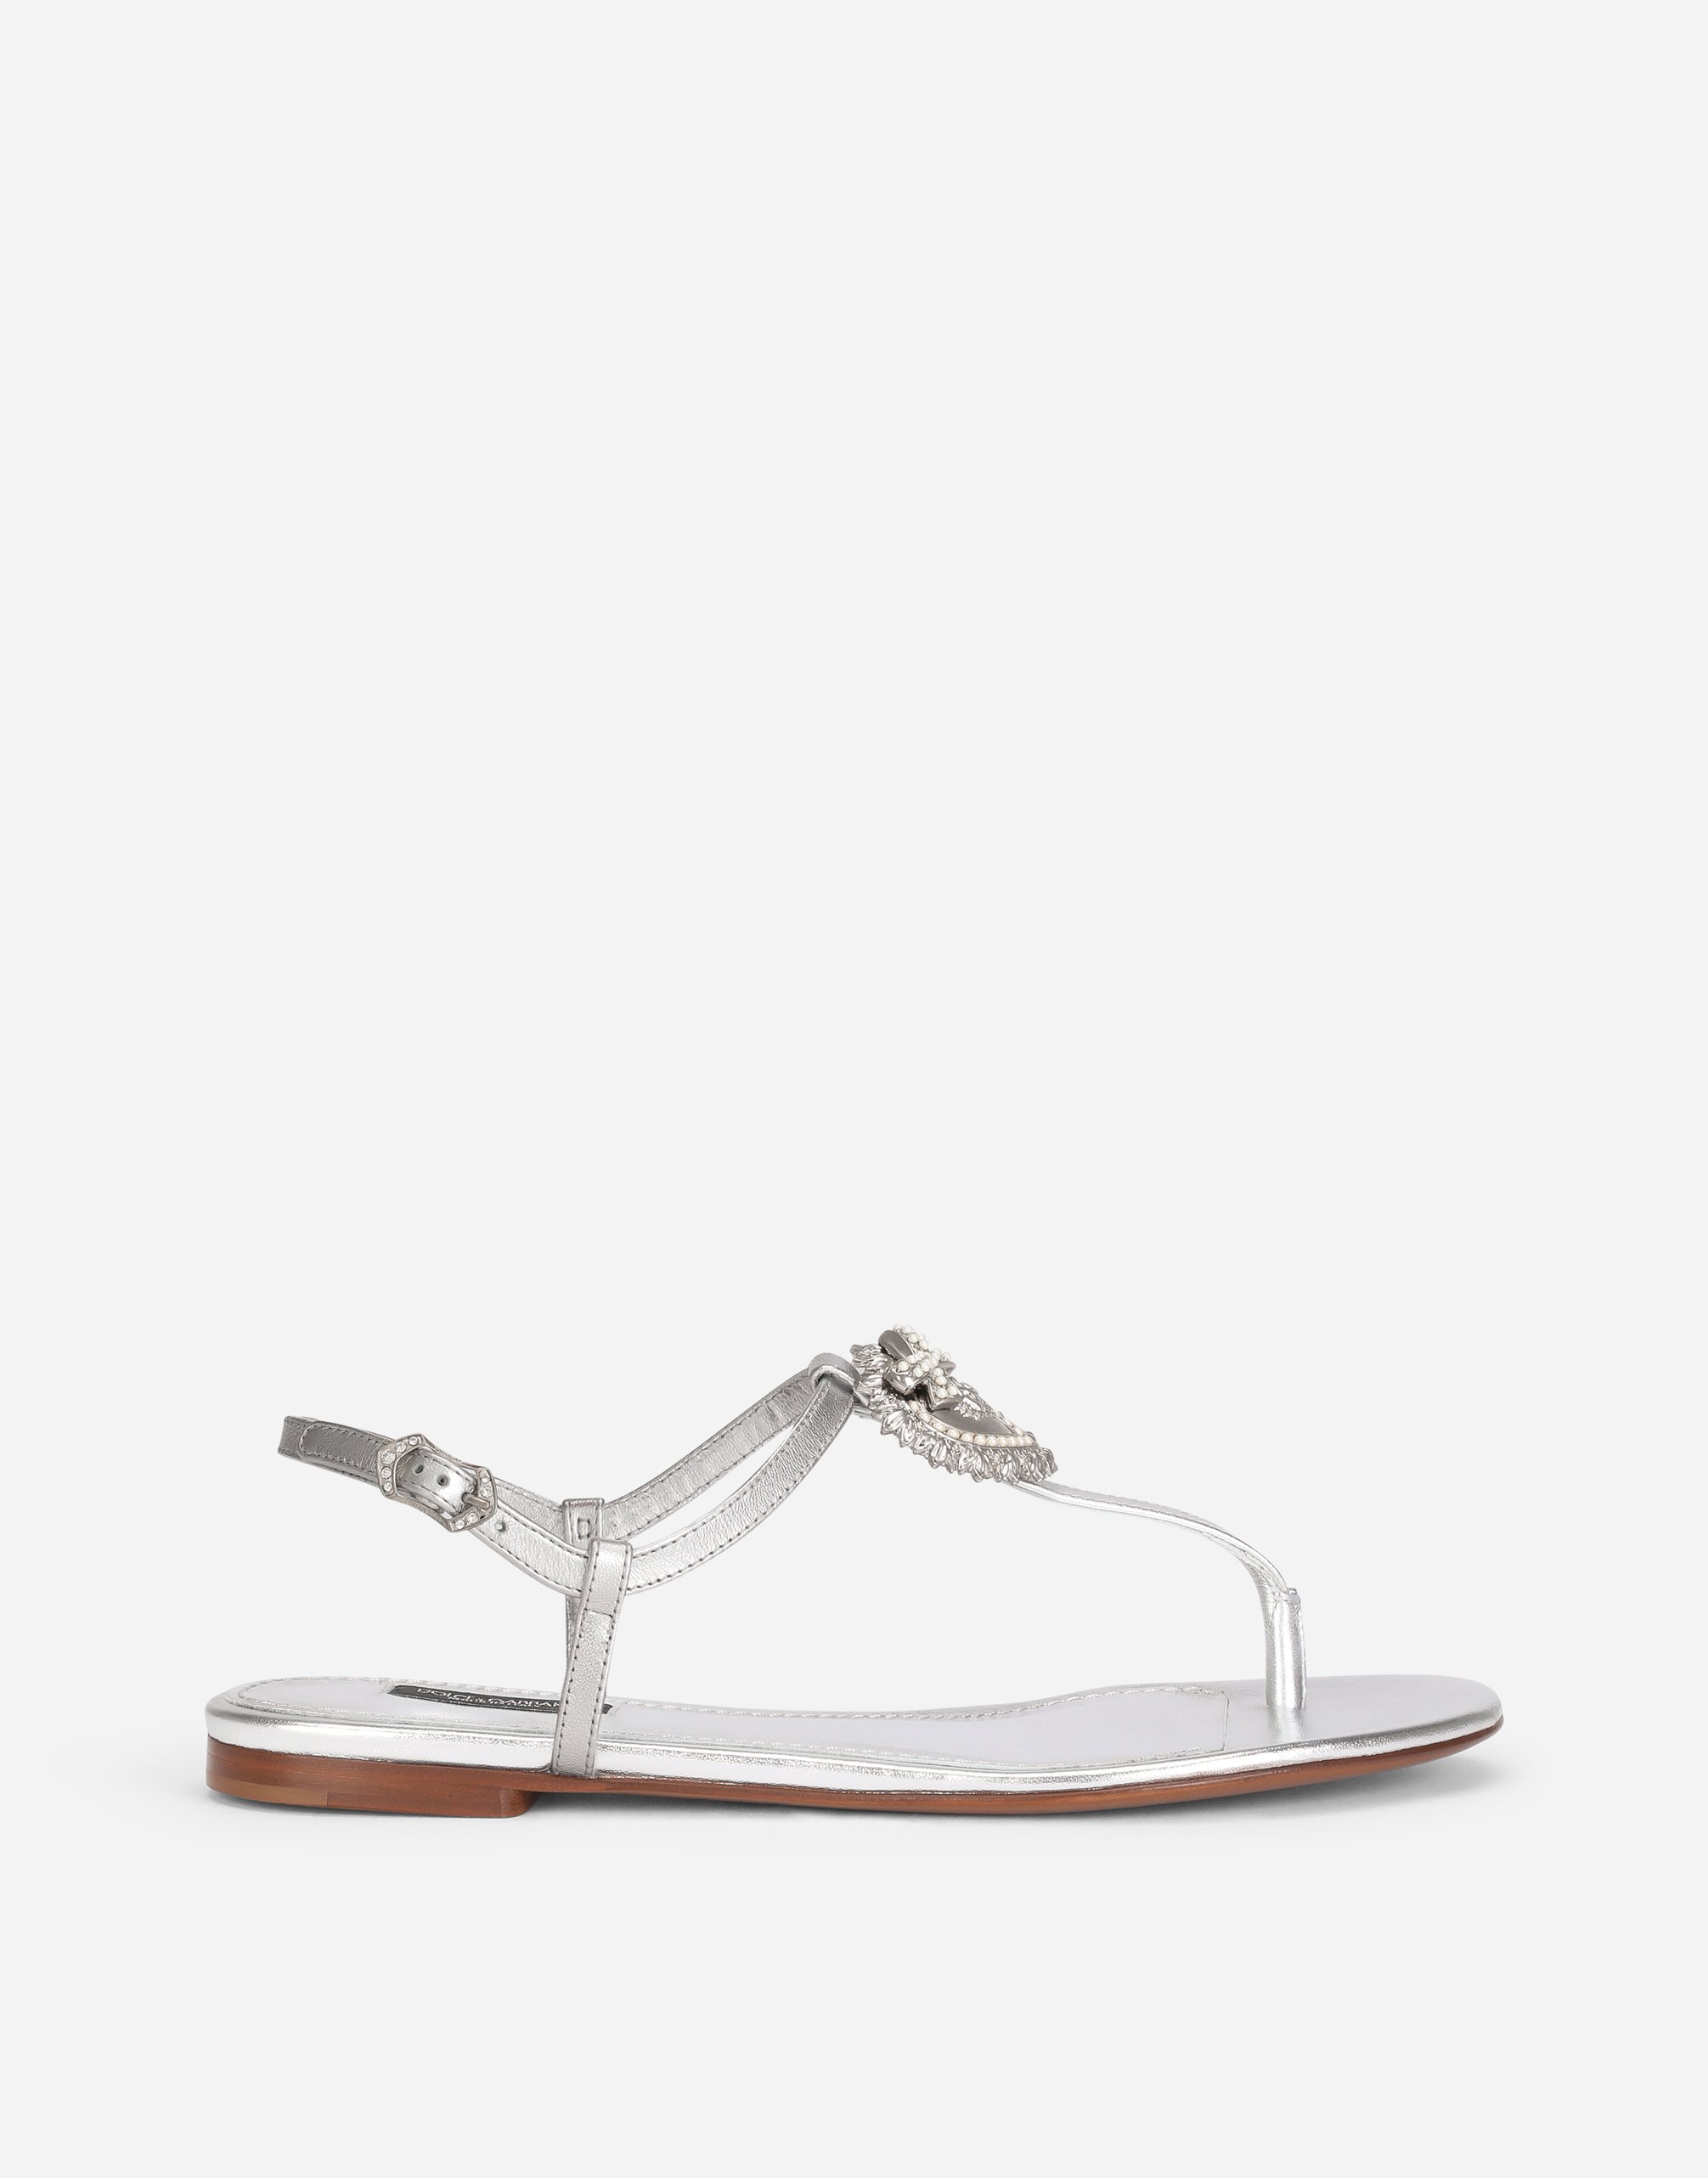 Devotion thong sandals in nappa mordore in Silver